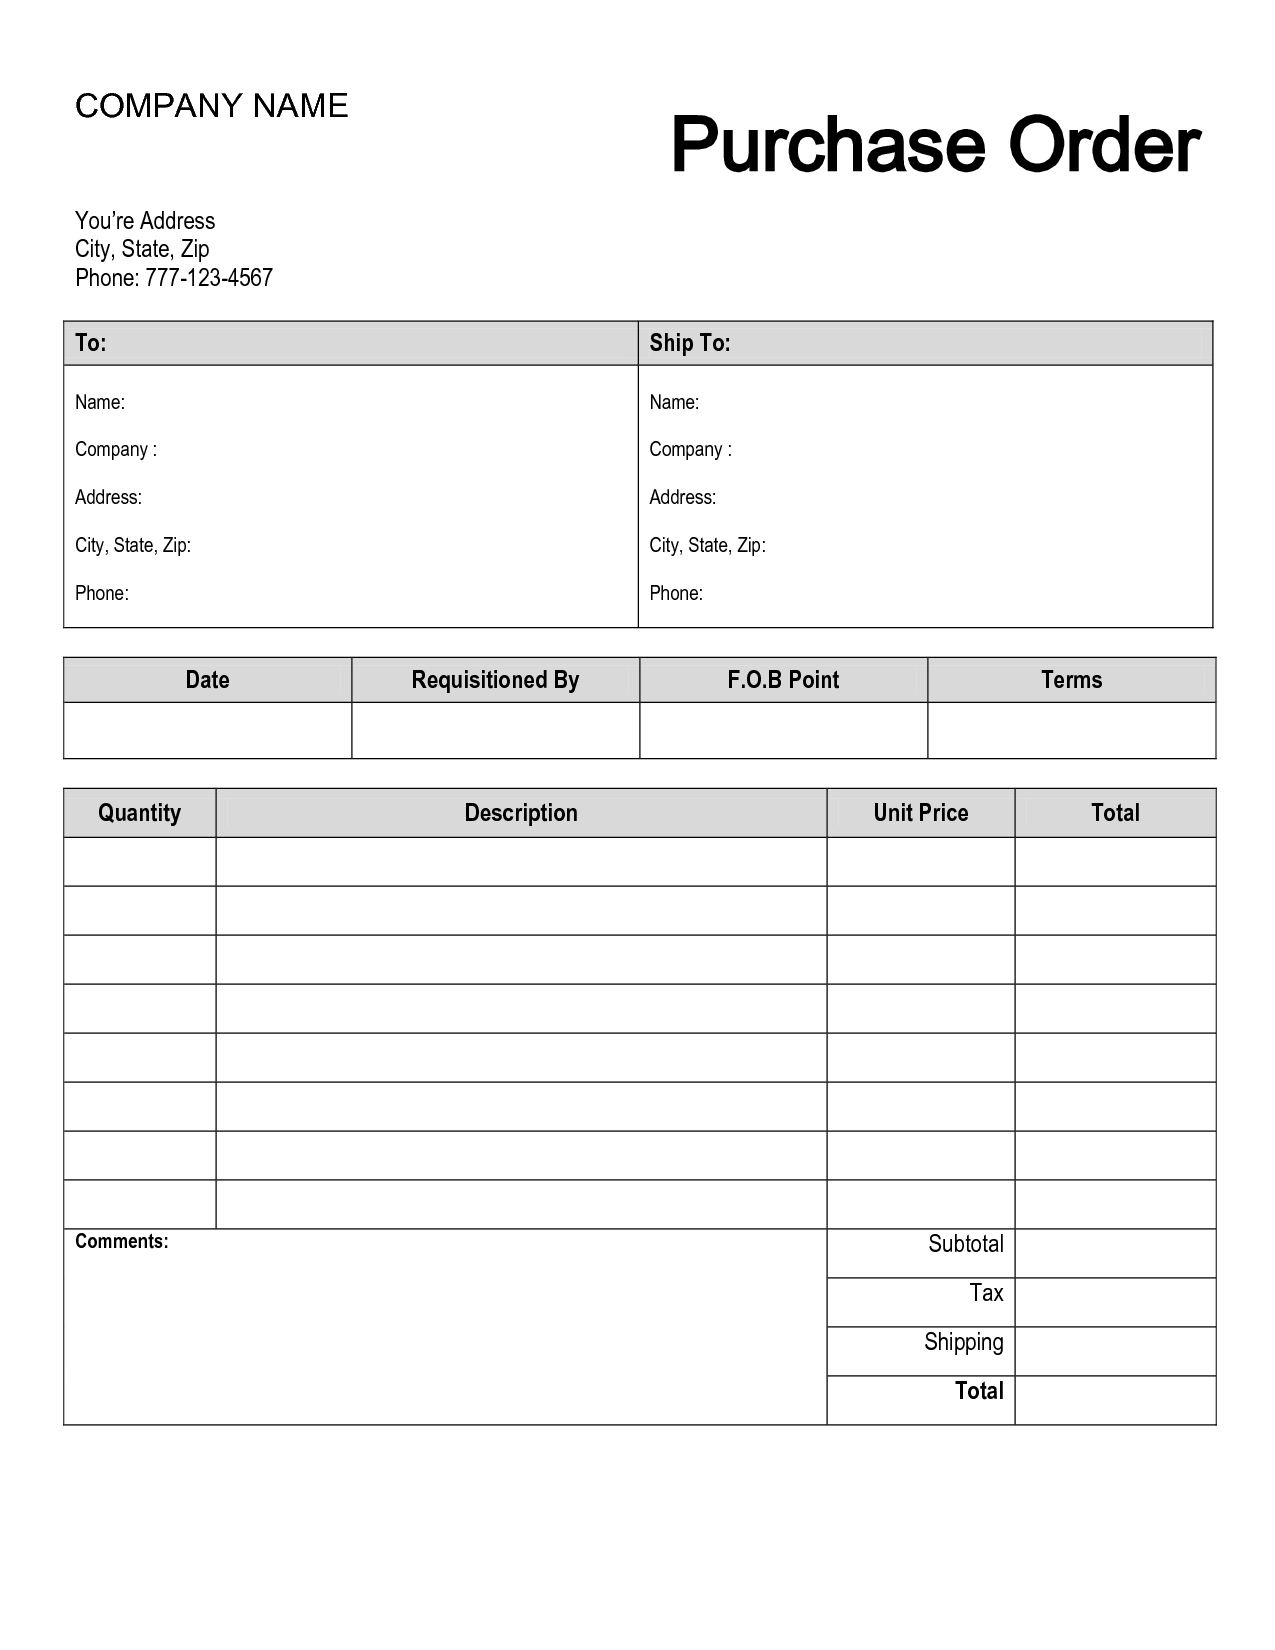 Free Printable Purchase Order Form | Purchase Order | Shop | Order - Free Printable Order Forms